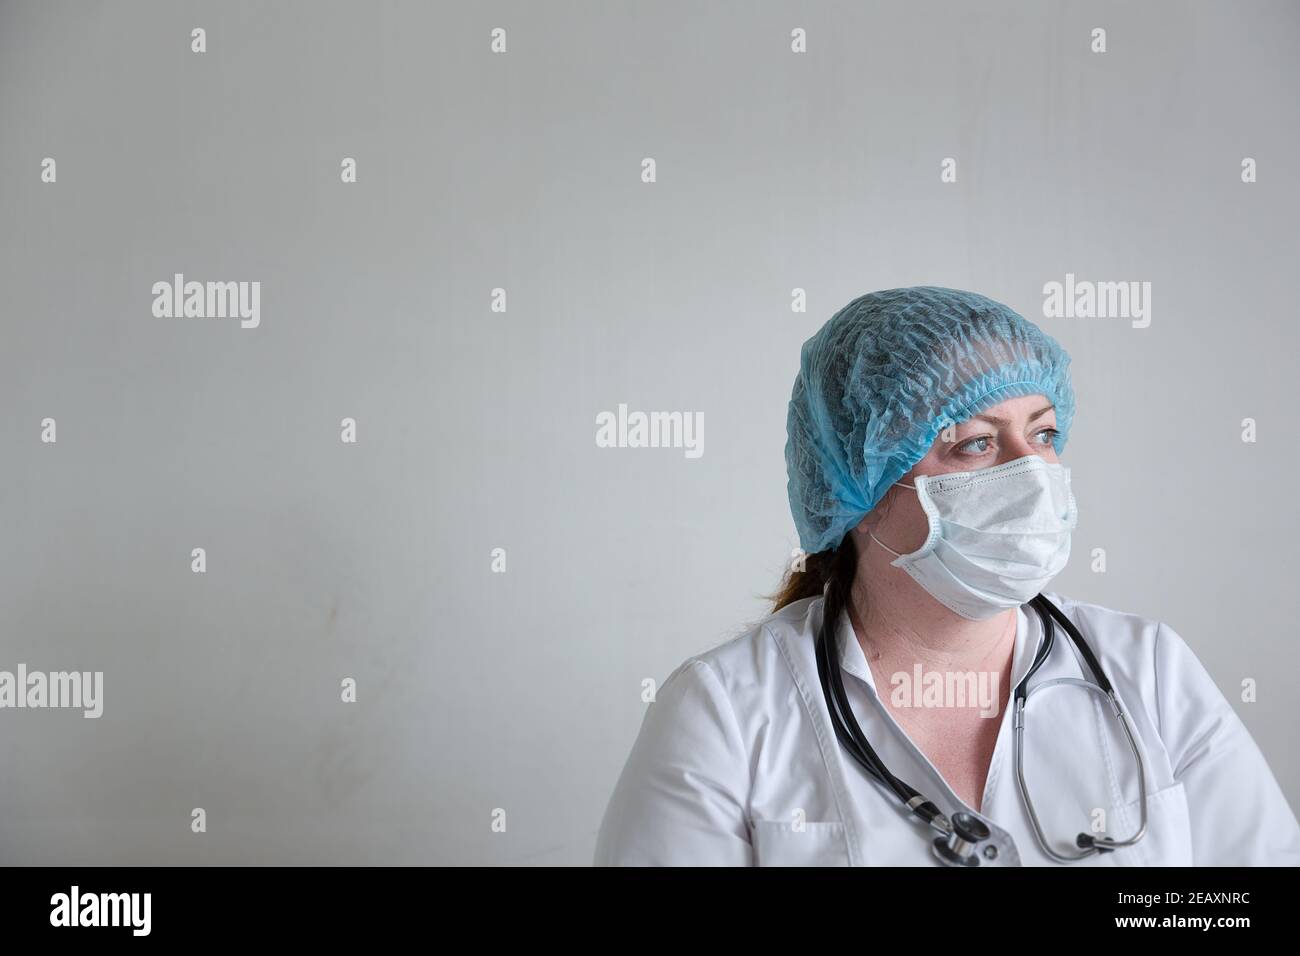 Image of a tired paramedic woman in medical clothes against a white wall looking to the side her gaze is fixed. Stock Photo